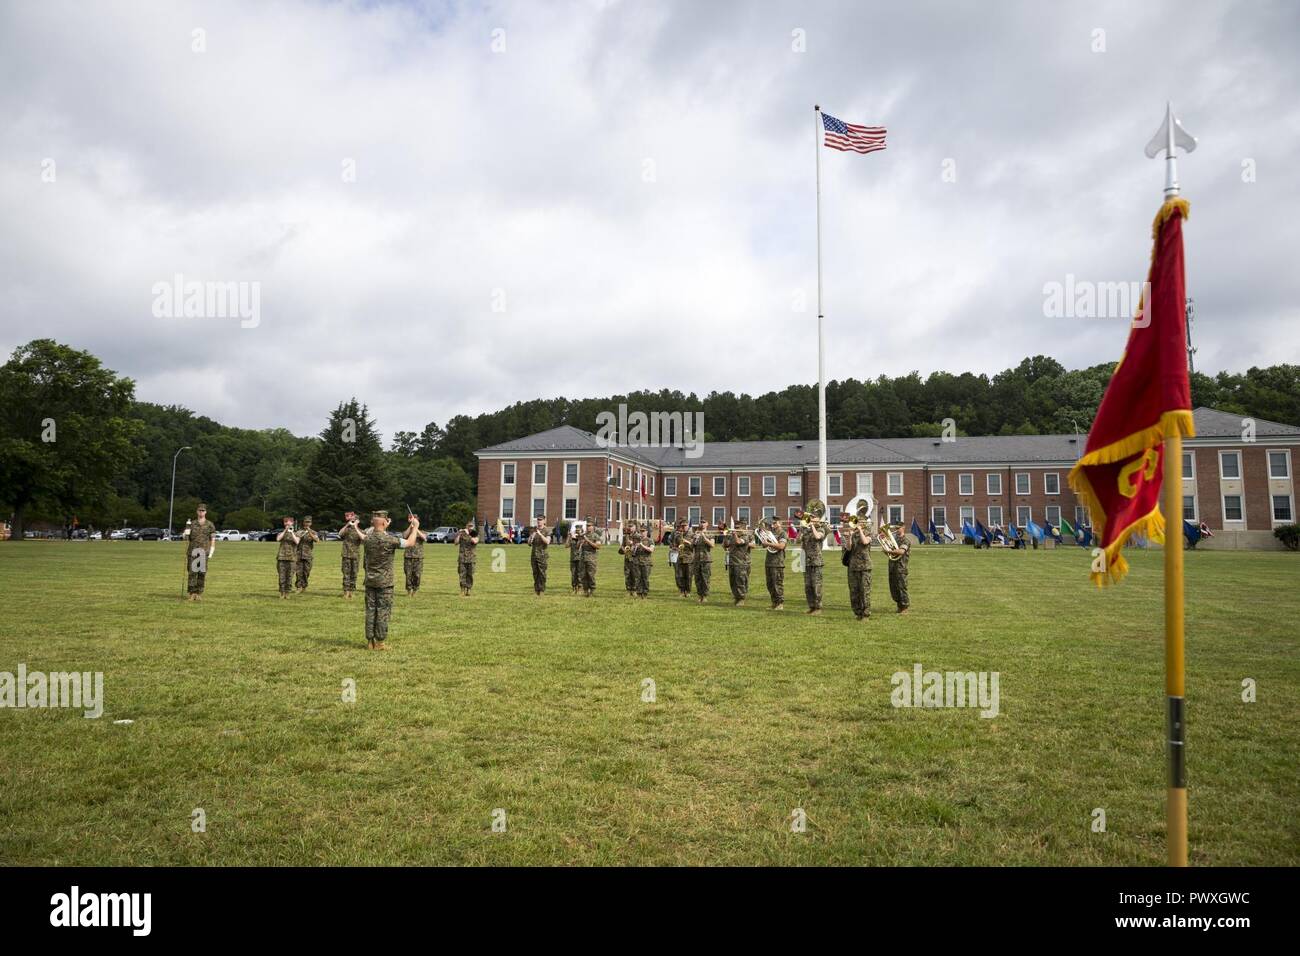 U.S. Marines with the Quantico Marine Band play a tune during a change of command ceremony at Lejeune Hall, Marine Corps Base Quantico, Va., June 23, 2017. During the ceremony, U.S. Marine Corps Col. Todd J. Oneto, outgoing commanding officer, relinquished command to Col. John B. Atkinson, incoming commanding officer. Stock Photo